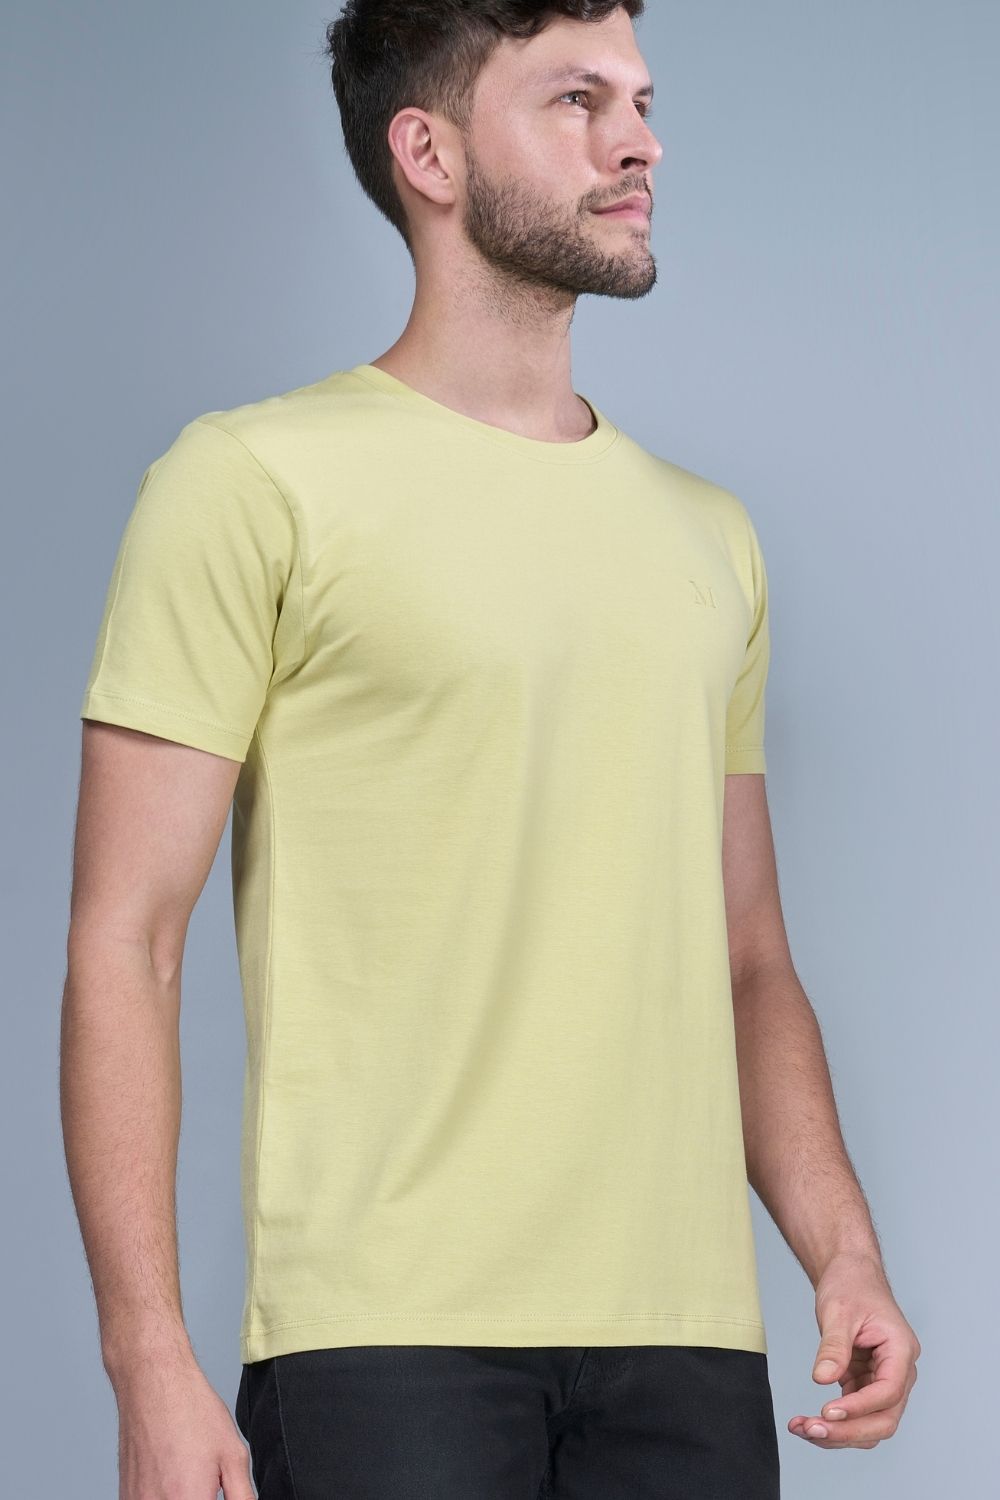 Lemon green colored, Solid T shirt for men, with half sleeves and round neck, side view.